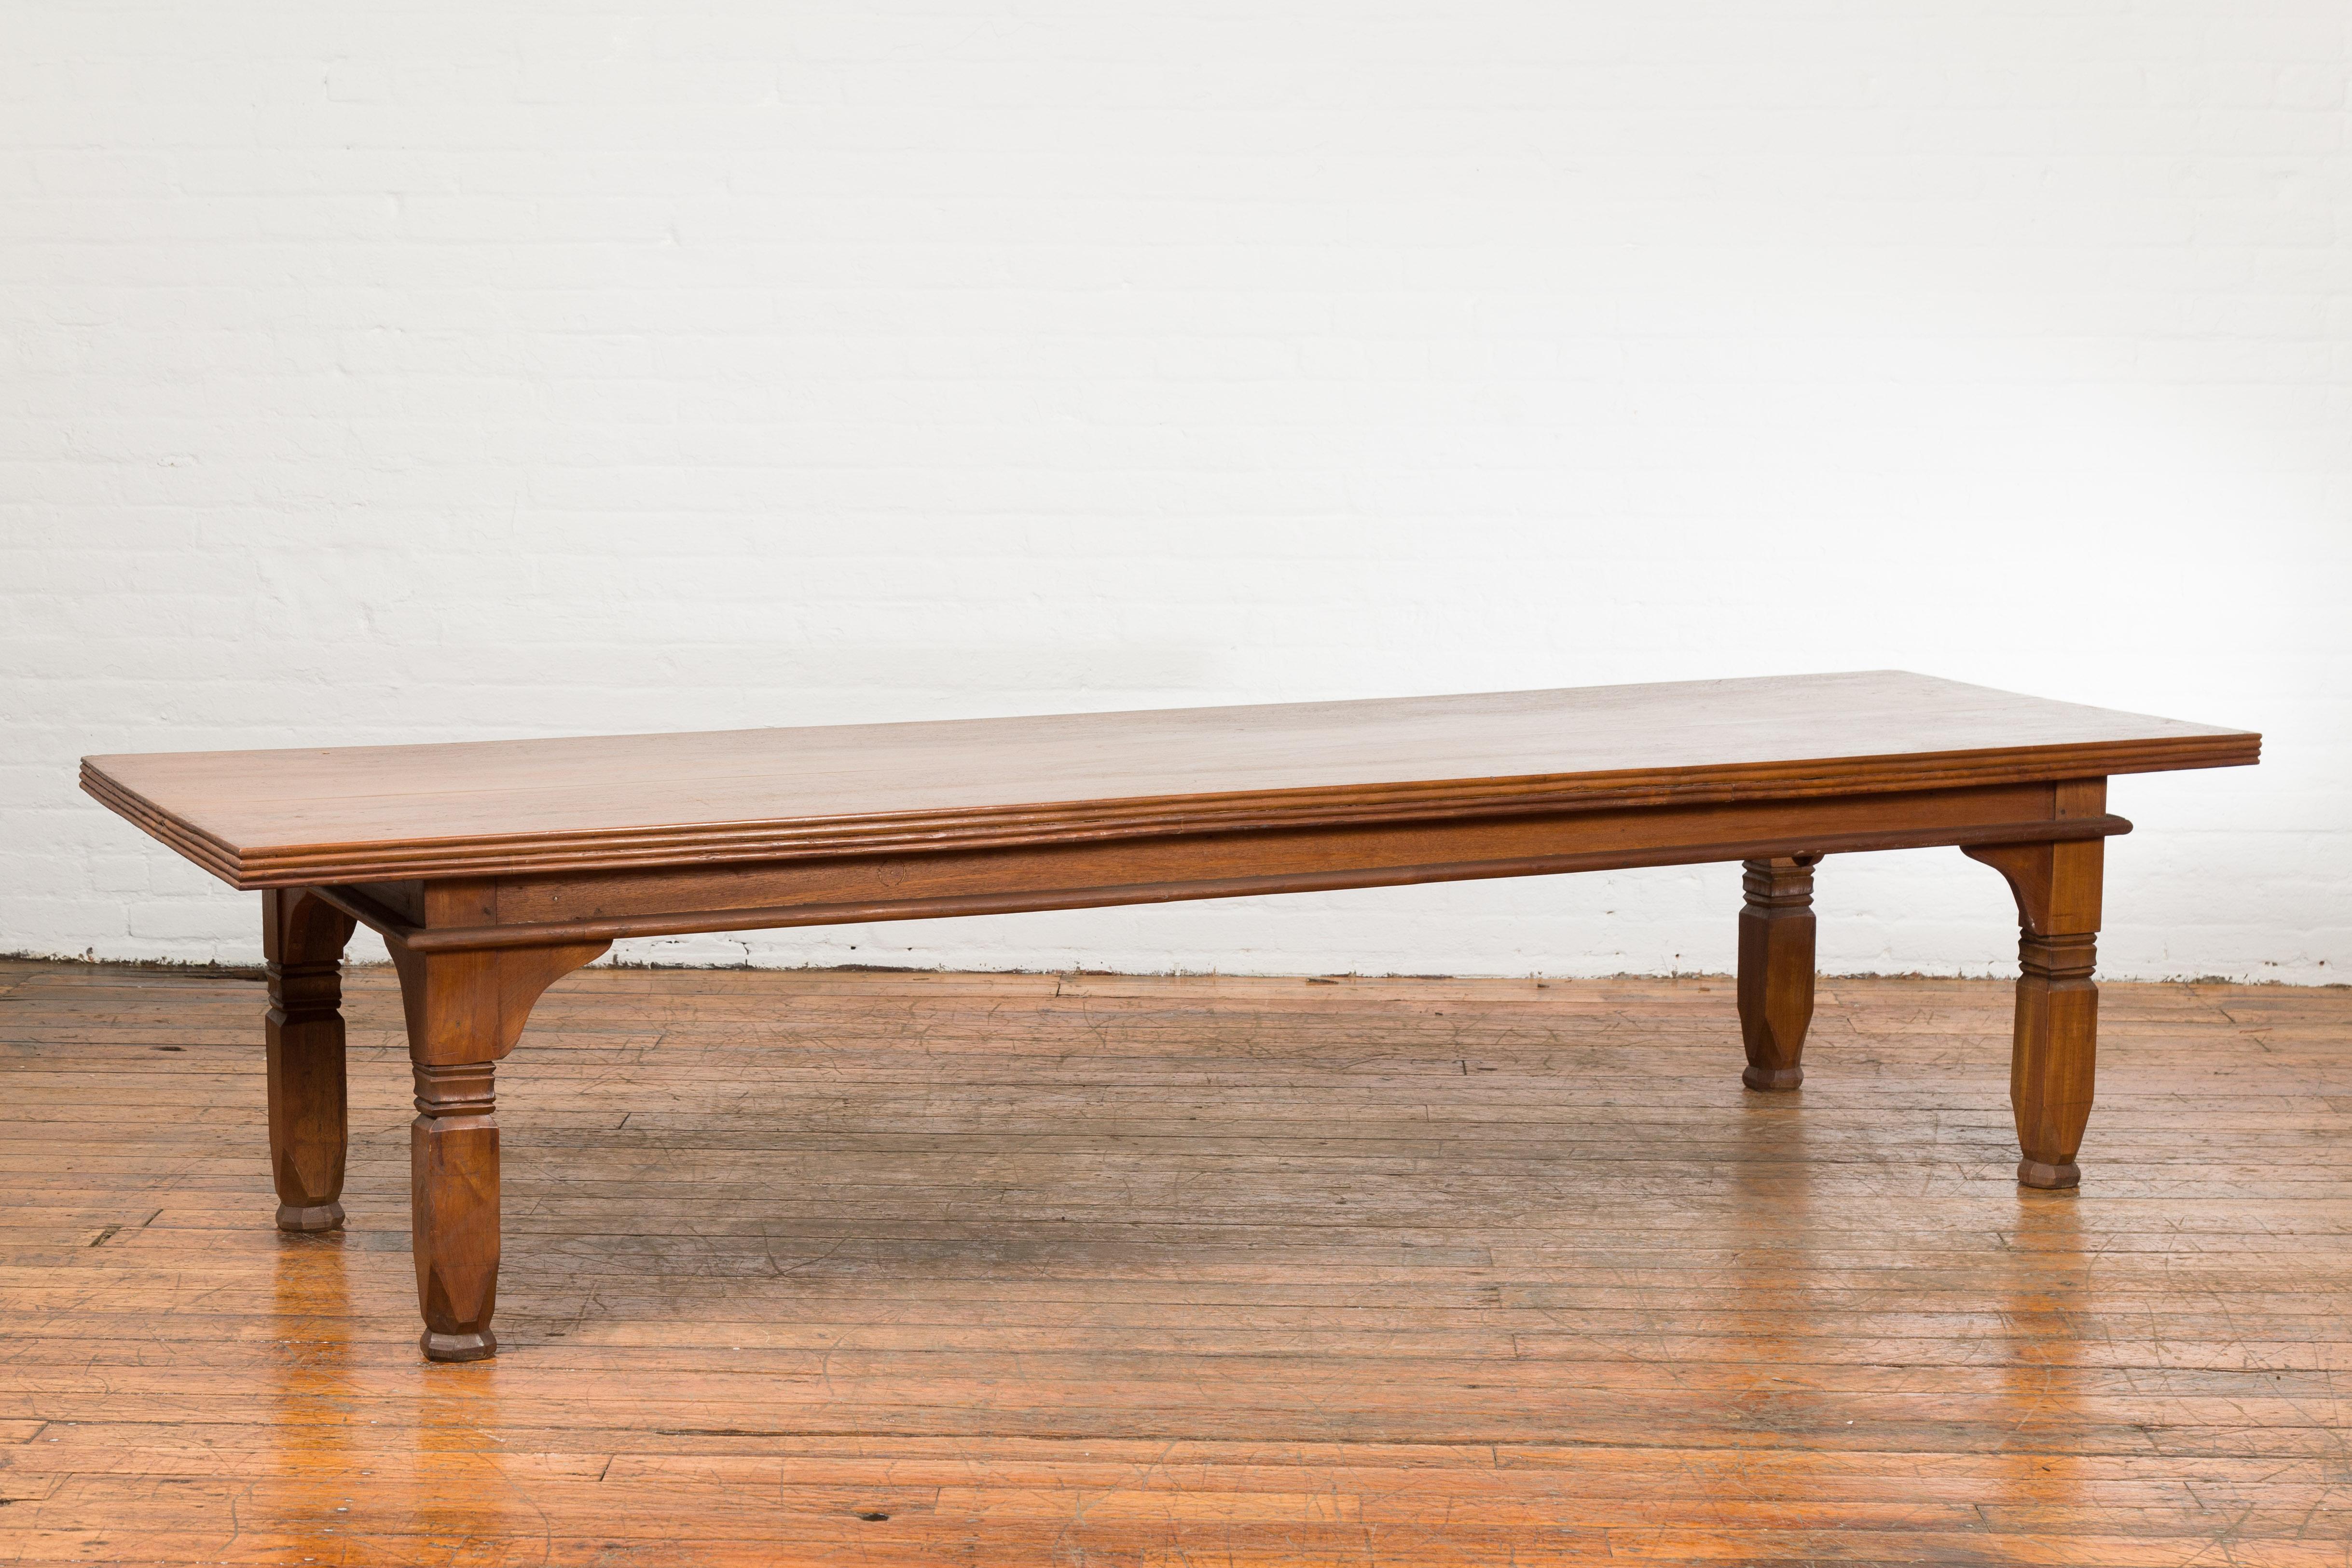 Oversized 19th Century Indonesian Coffee Table with Reeded Edge and Carved Legs For Sale 3